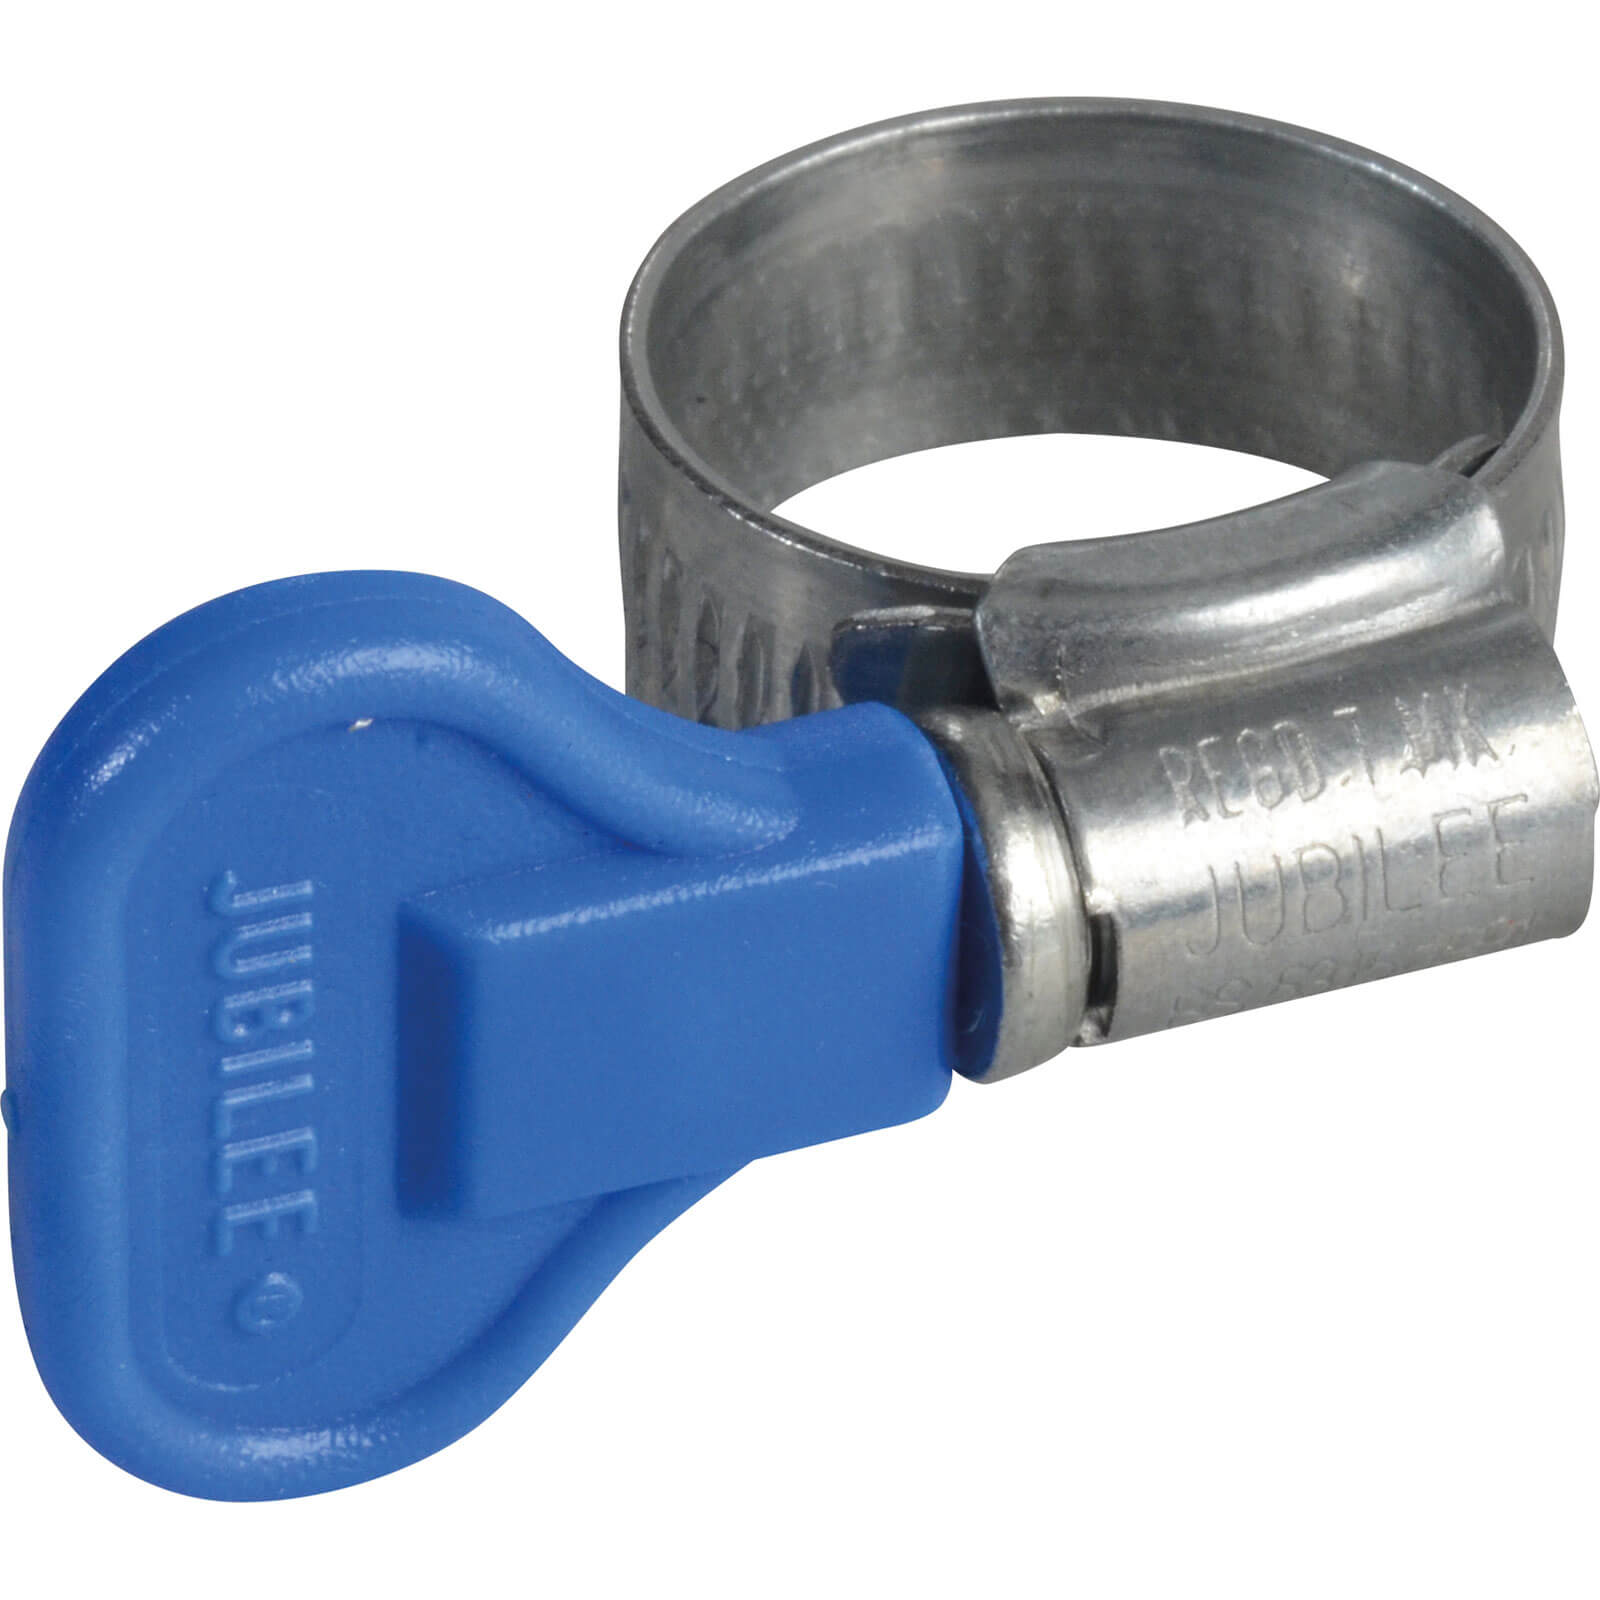 Jubilee OX Zinc Plated Hose Clip with Wing Spade 16 - 25mm (5/8 to 1")